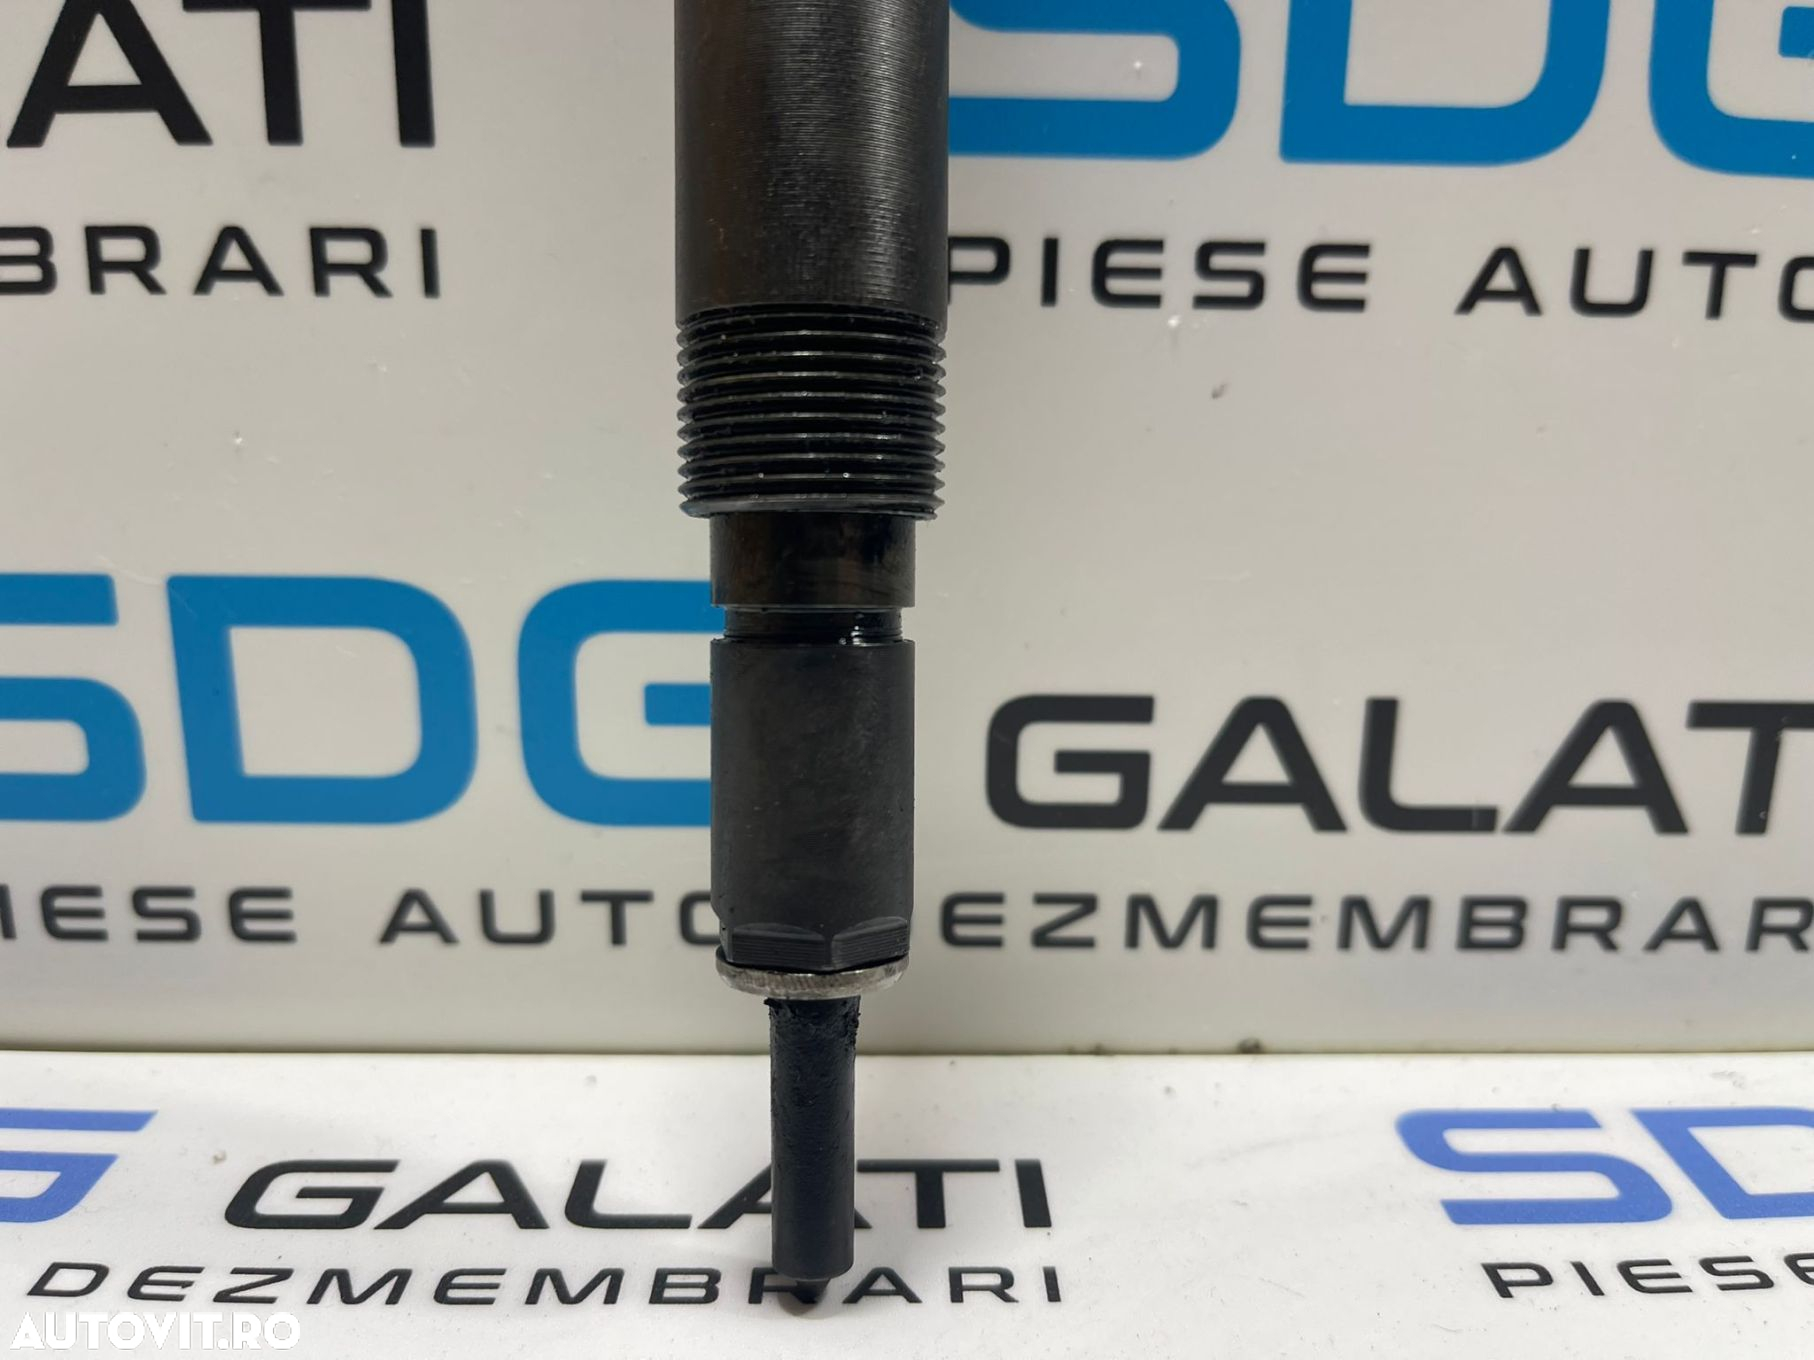 Injector Injectoare Ford Mondeo 2.0 TDCI 66KW 2000 - 2007 Cod 0432133800 1S7Q9-K546-BE [B2977] - 2